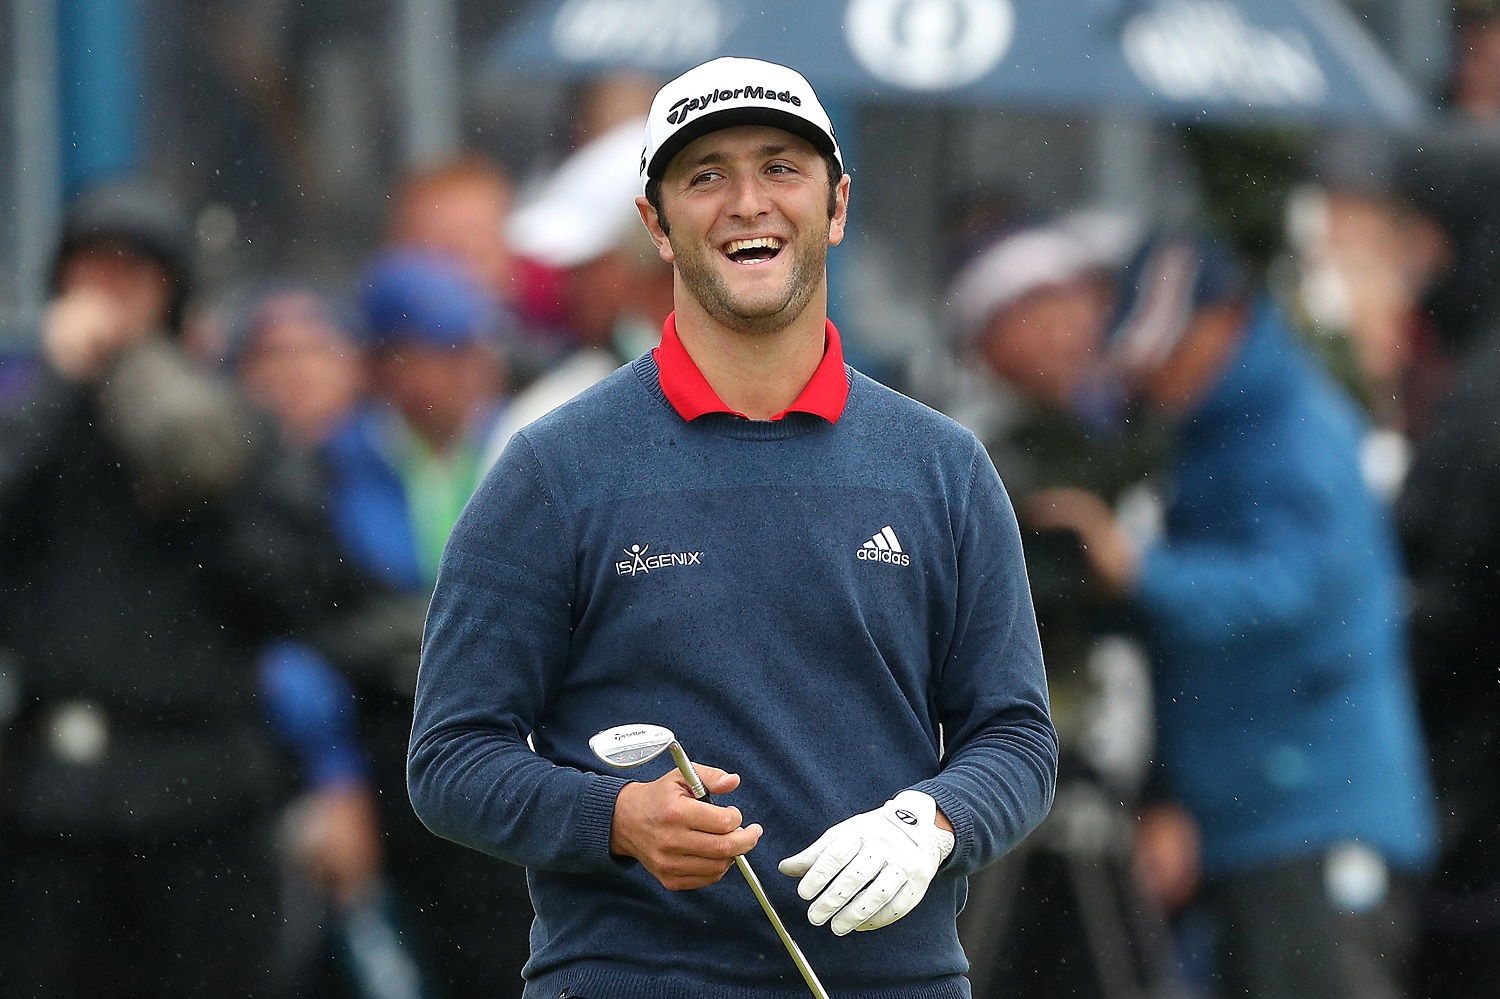 Jon Rahm's weekend triumph has moved him to No. 1 in the world in the new rankings. |  Christopher Lee/Getty Images